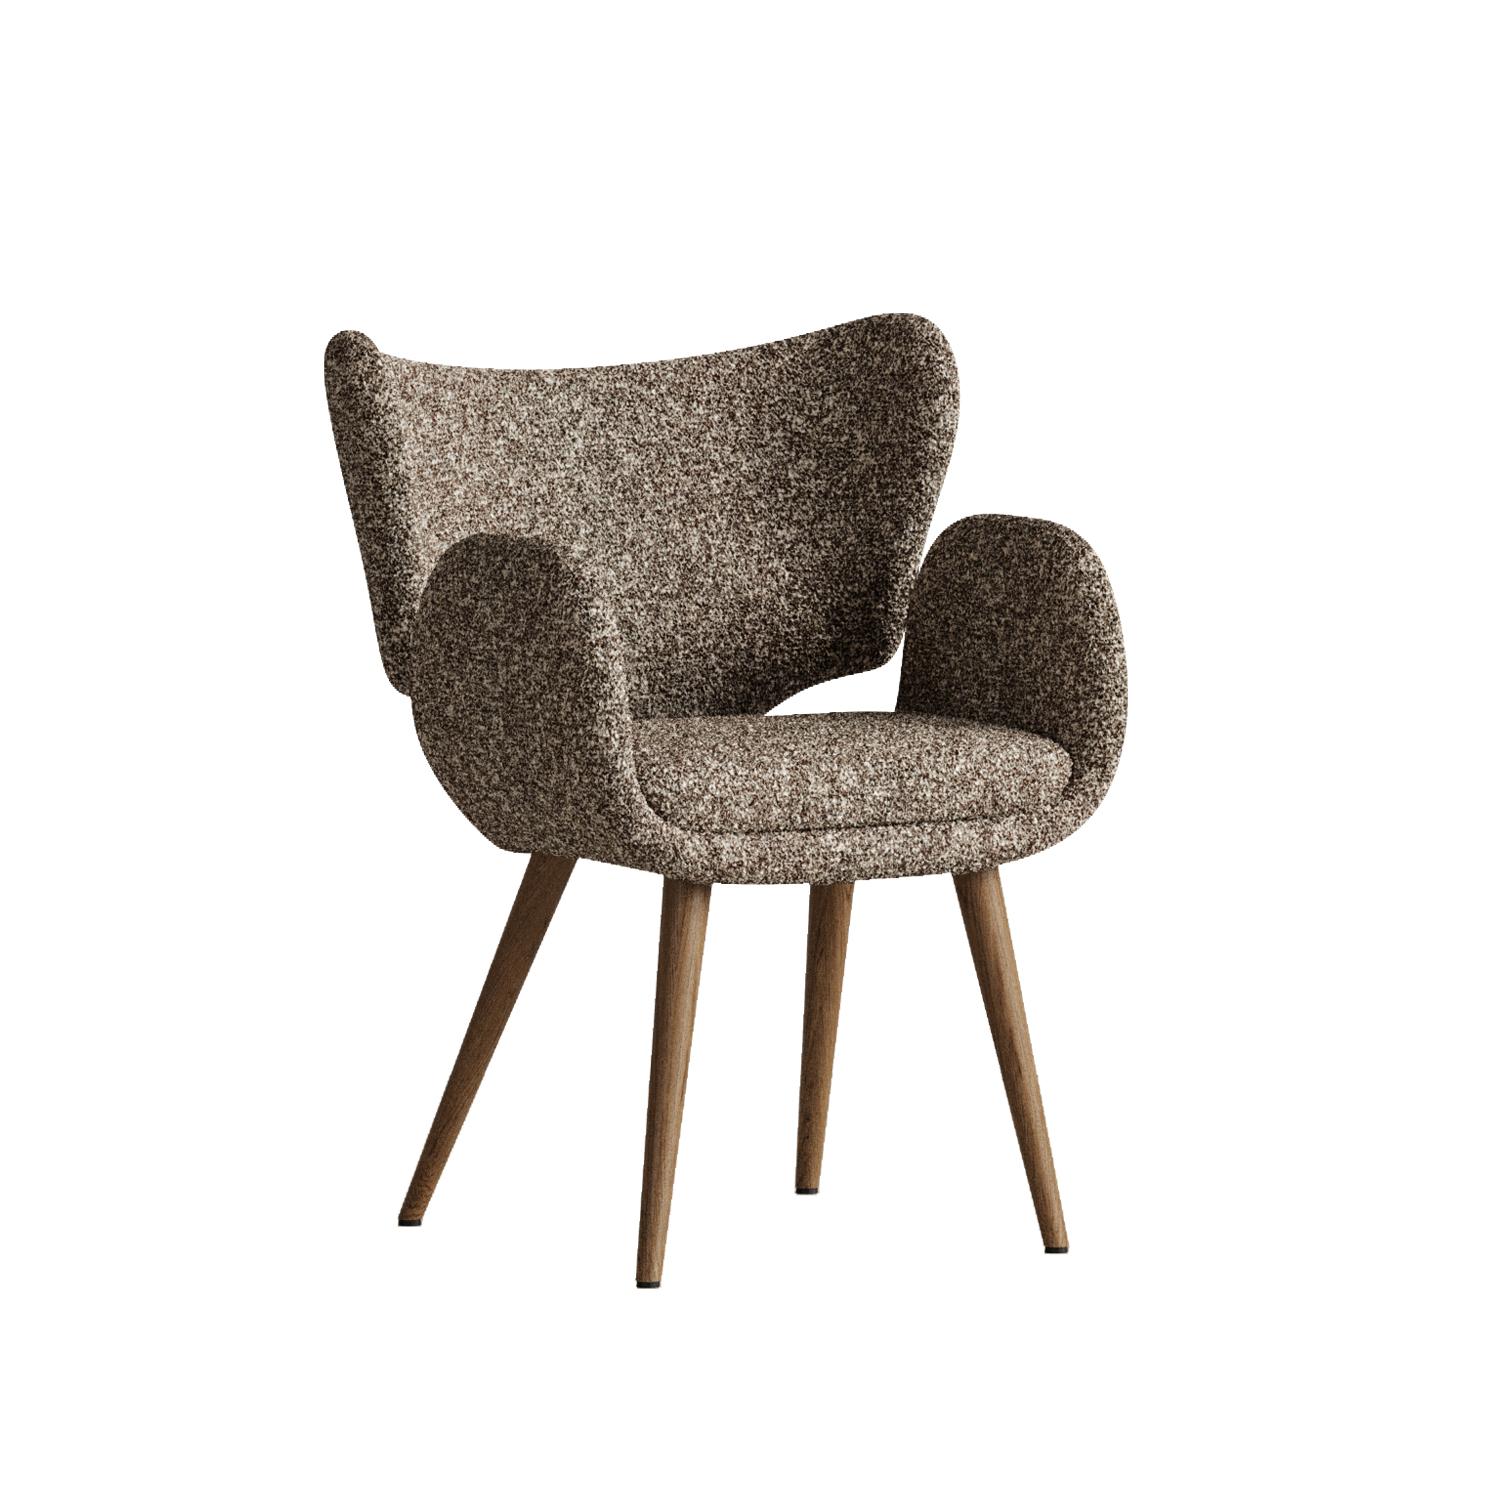 Chocolate Madina Chair by Plyus Design
Dimensions: D 64 x W 68 x H 90 cm
Materials:  Wood, HR foam, polyester wadding, fabric upholstery.

“Madina” chair.
The diamond of your dining room.



PLYUS Furniture creates pieces in collectible design